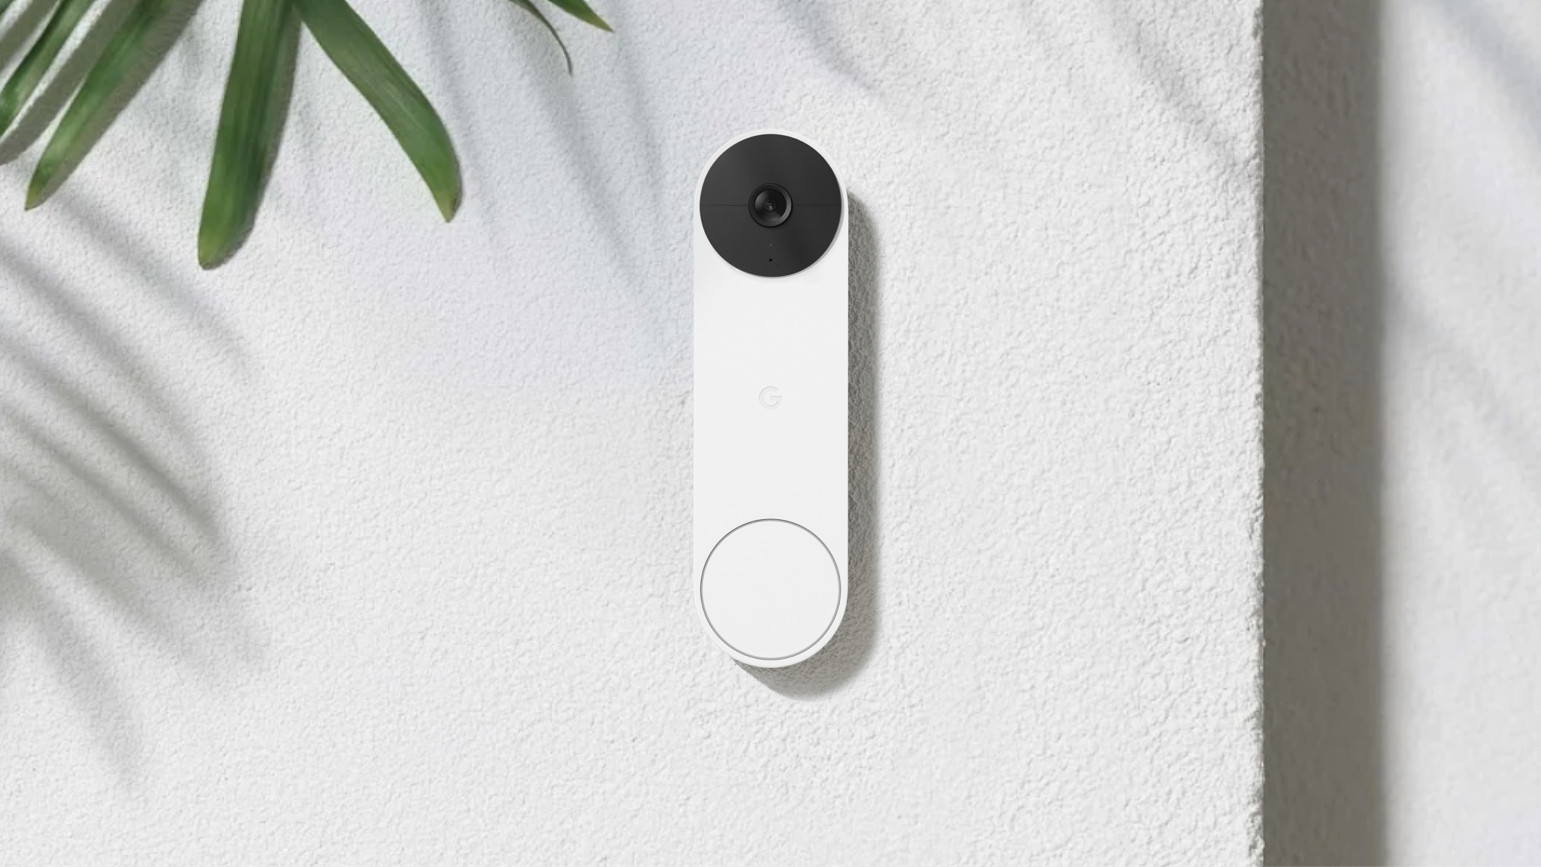 Google Nest Doorbell (Battery) Review: Smart And Chunky